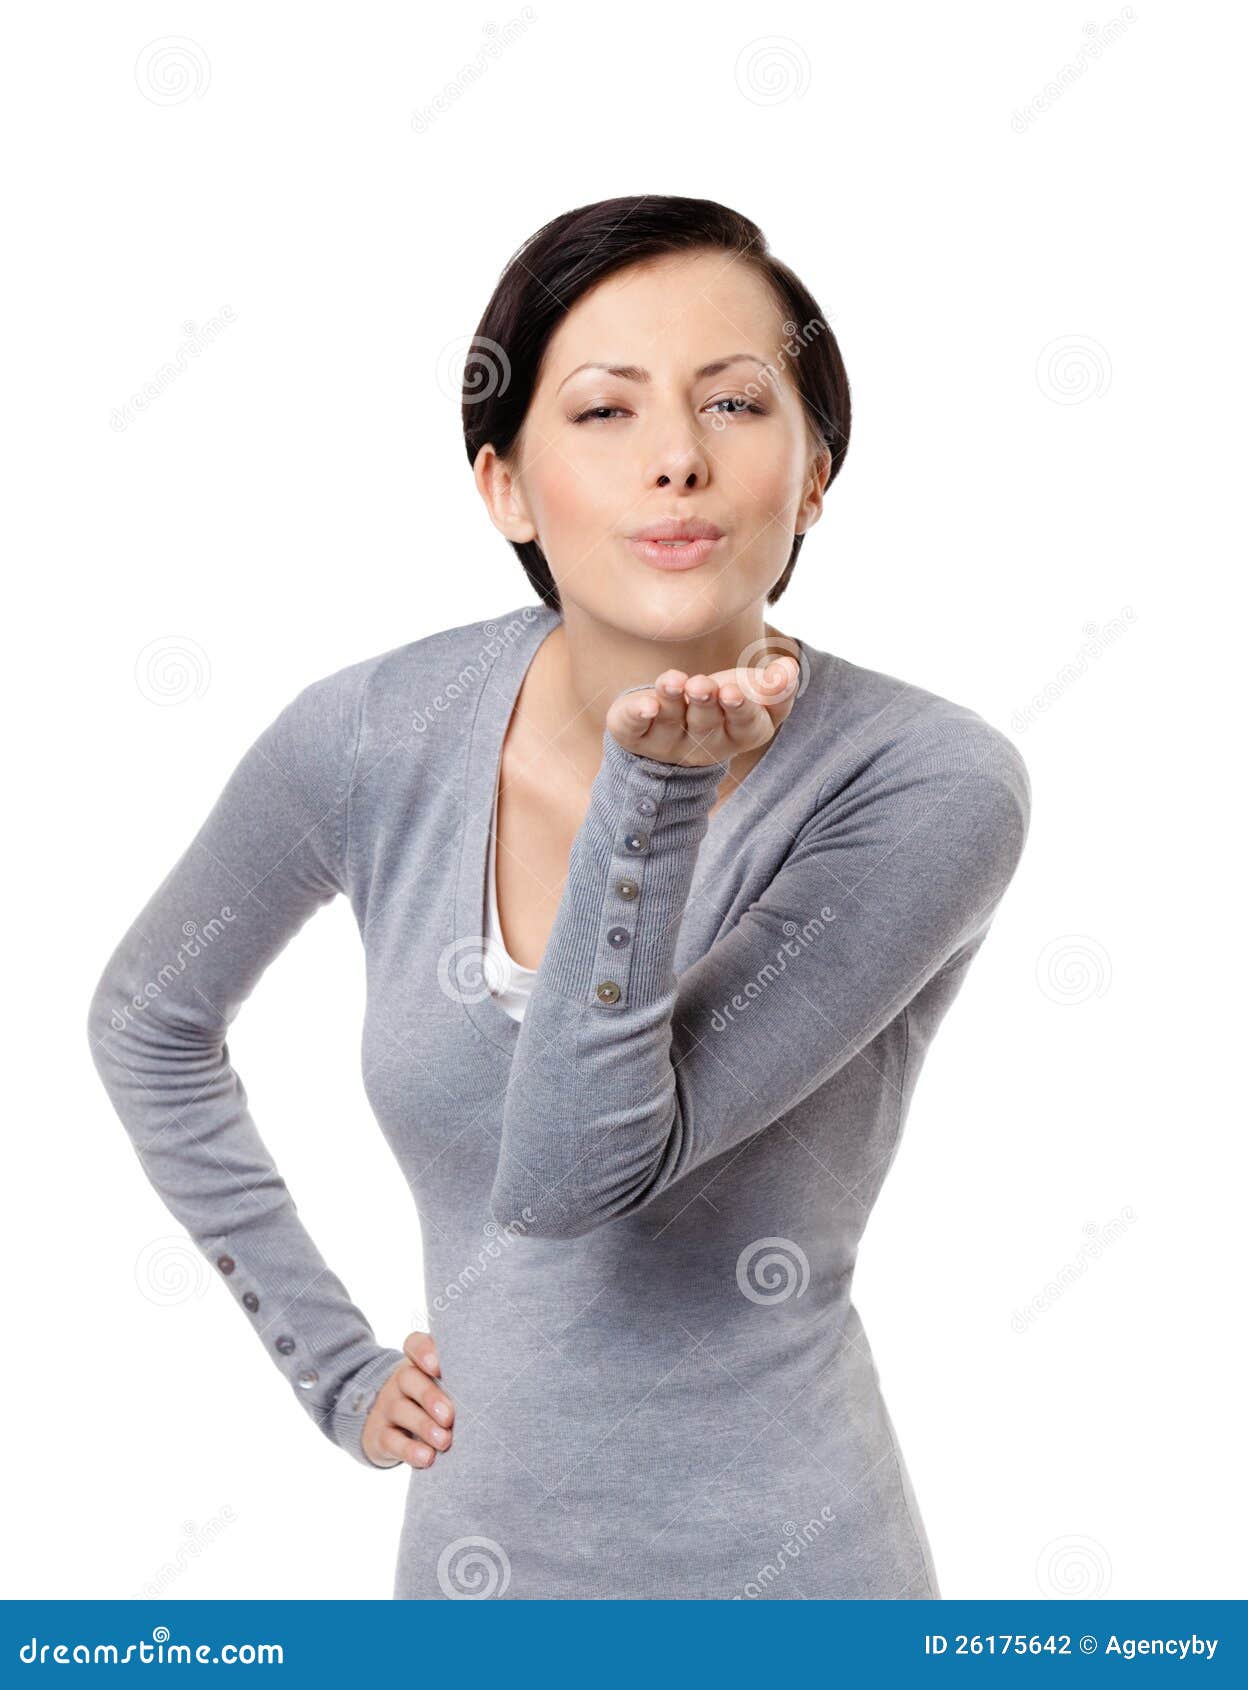 Blowing a kiss stock photo. Image of caucasian, cute - 26175642